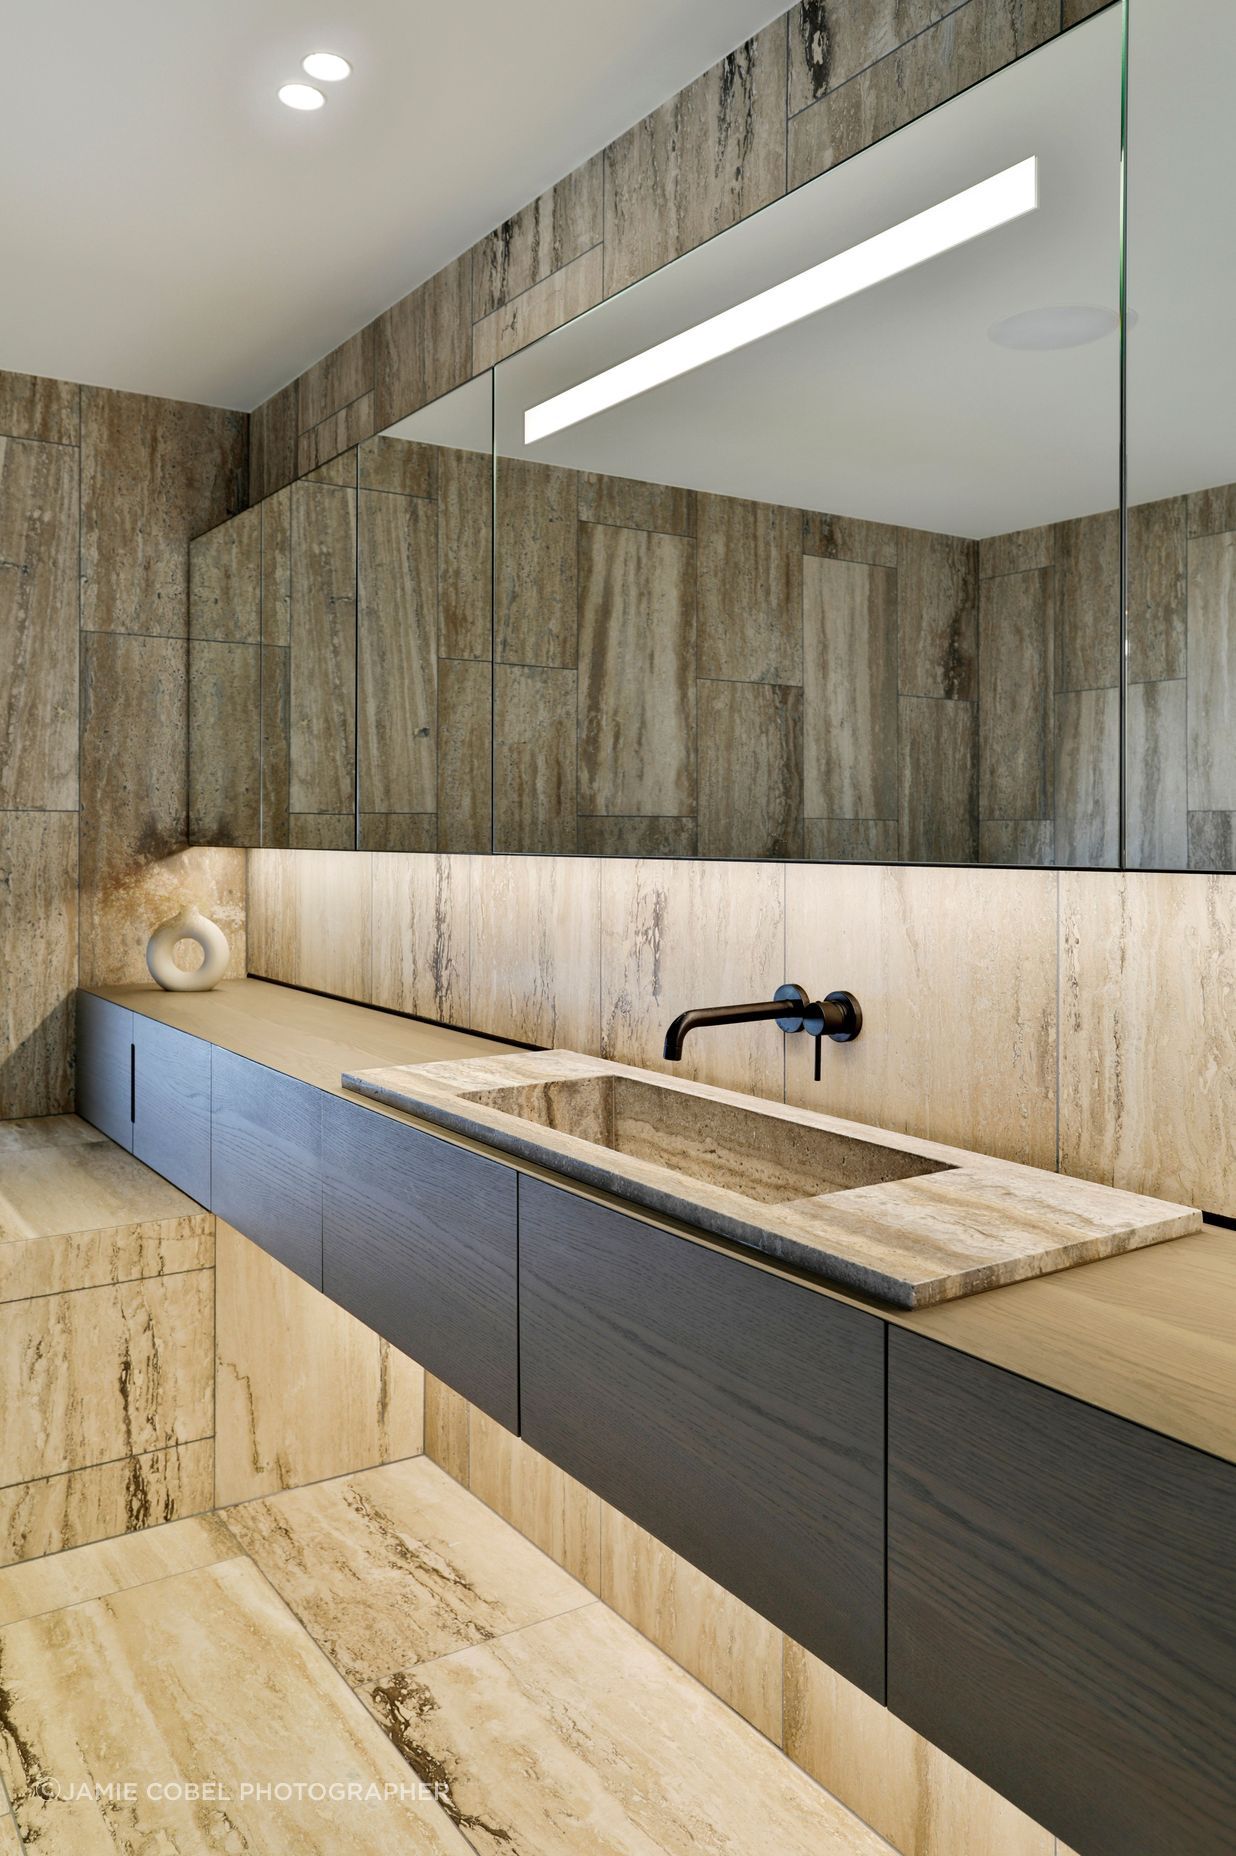 A bathroom continues the travertine materiality.